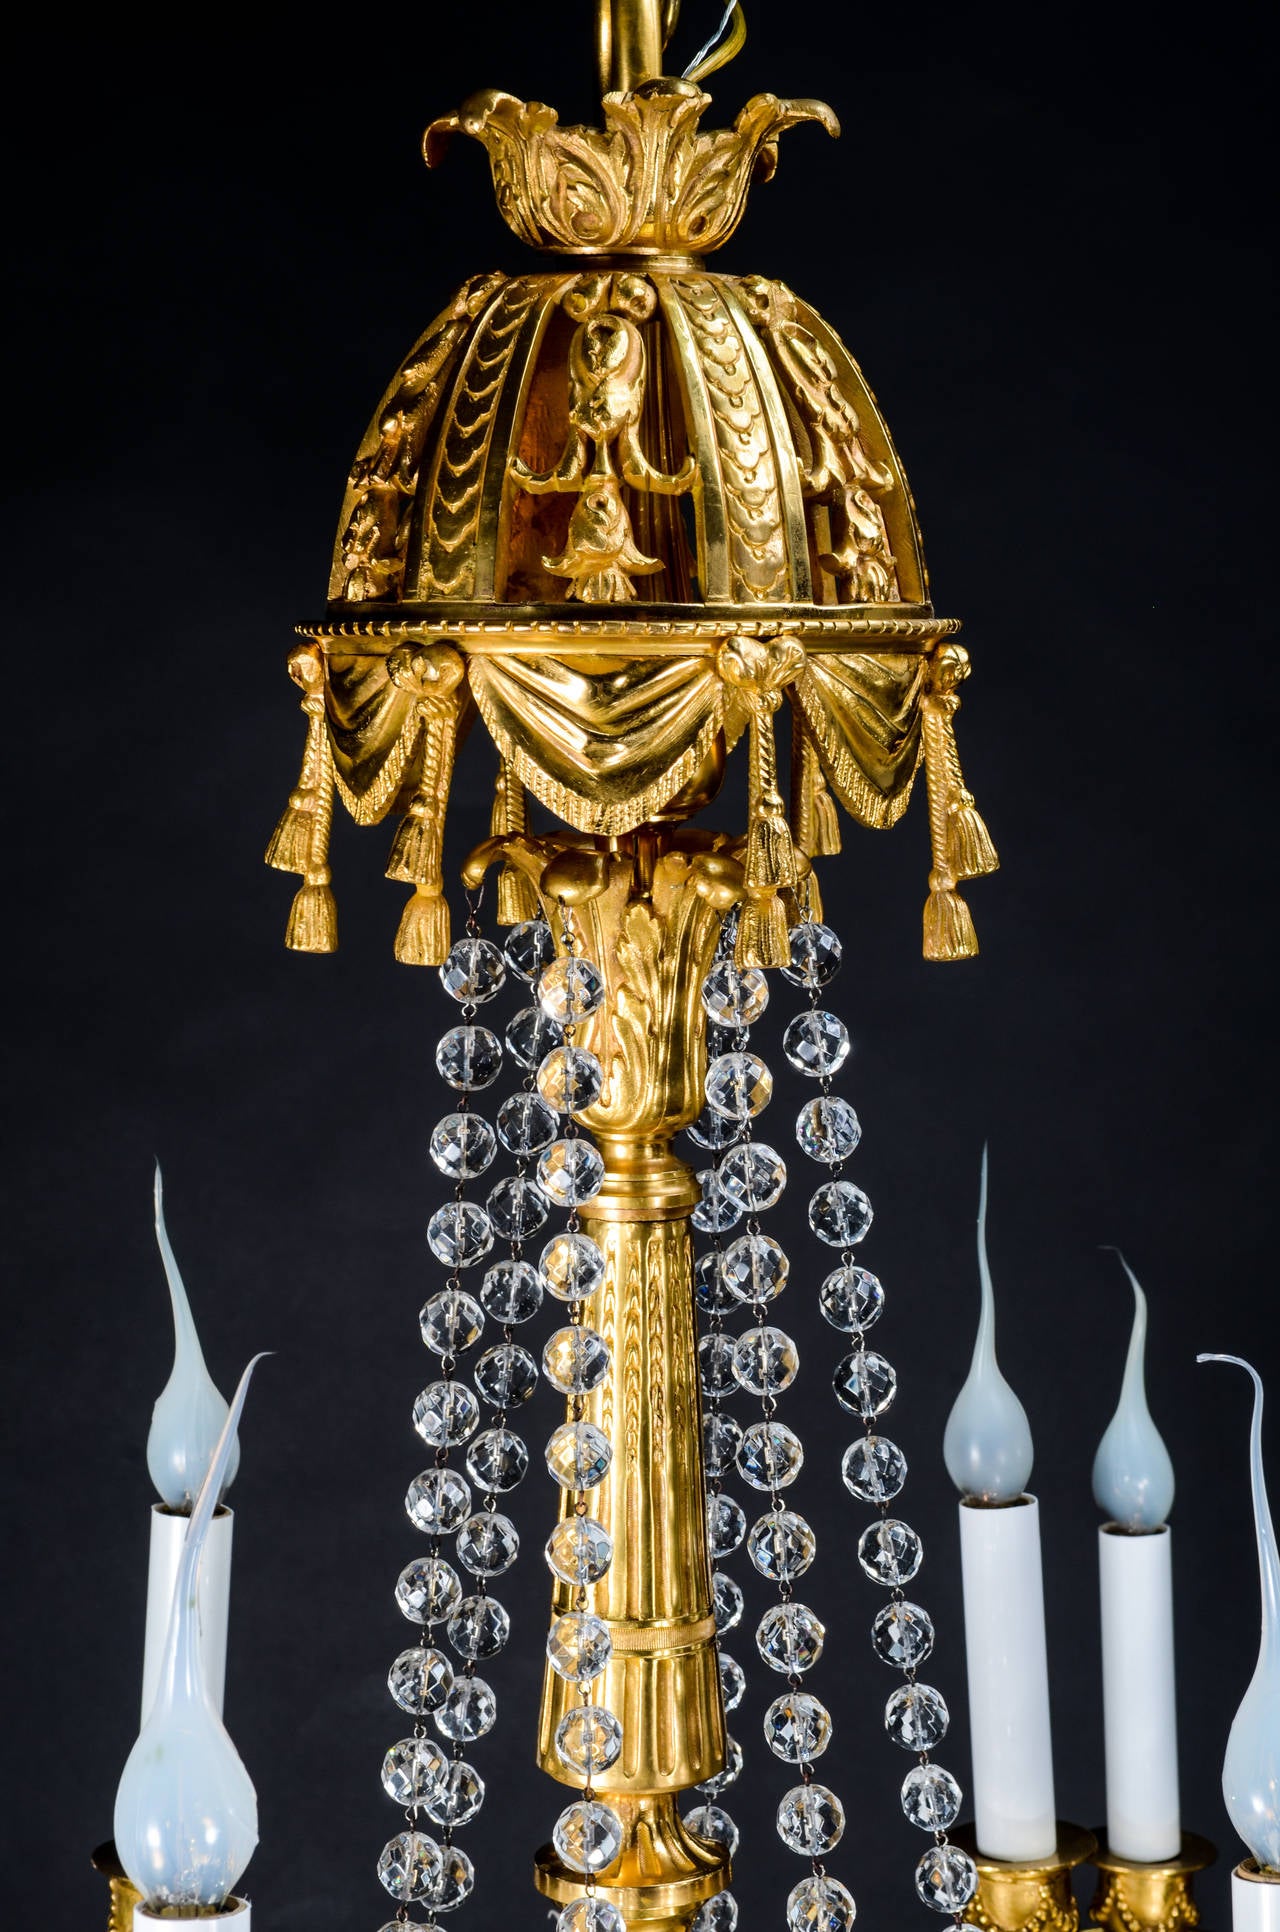 19th Century Superb Antique French Louis XVI Style Gilt Bronze and Crystal Chandelier